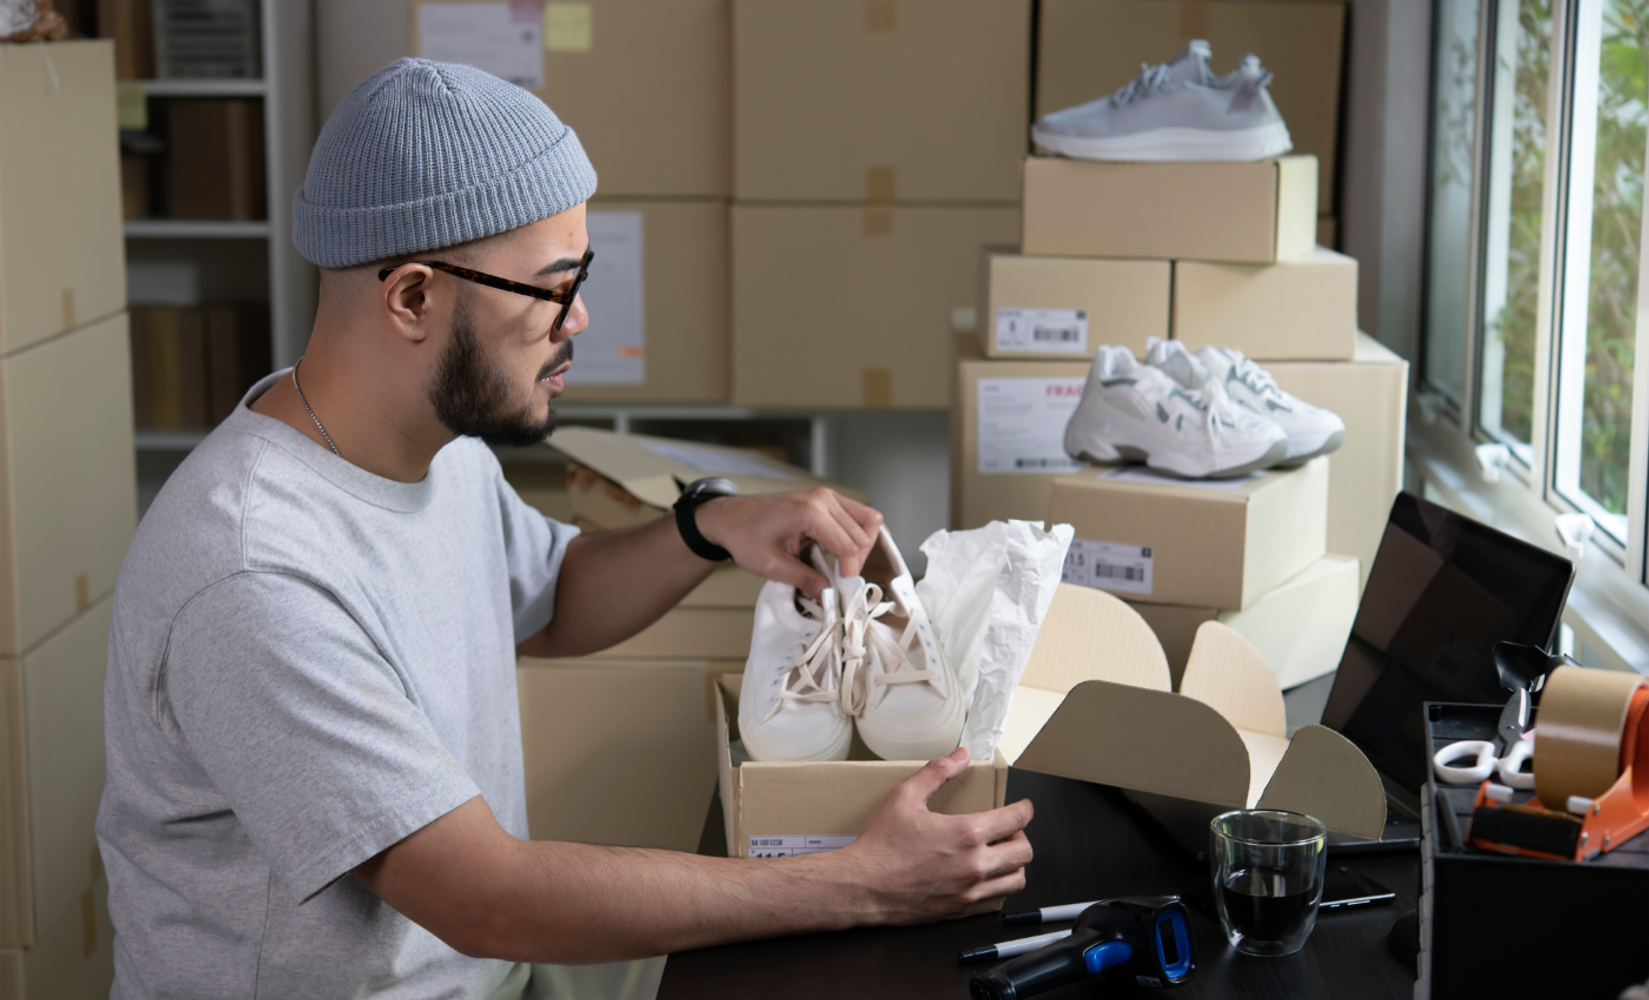 Man wearing beanie packs shoes into shoe boxes (multi-brand strategy)